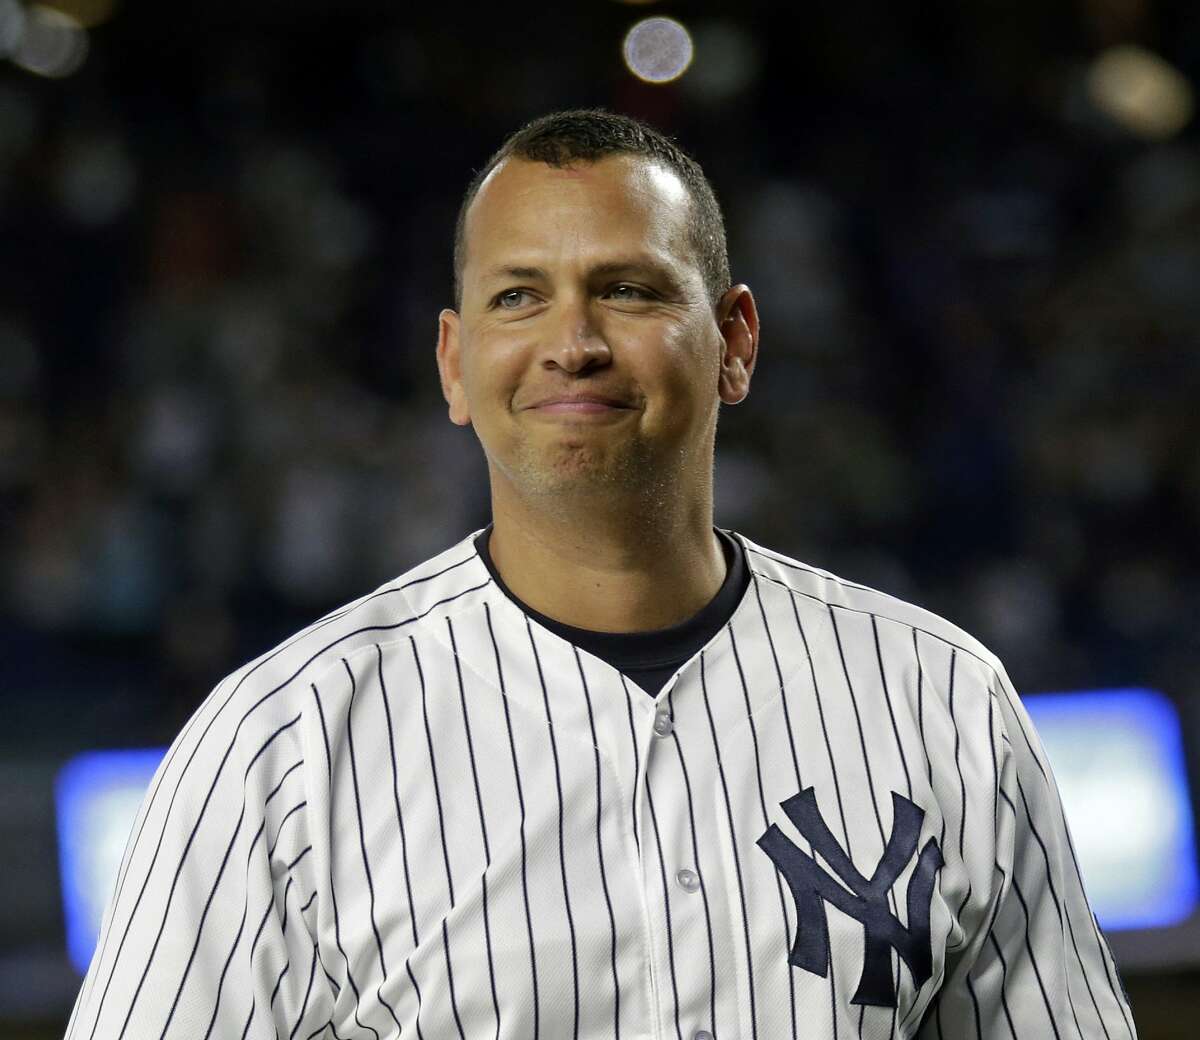 FILE - In this Aug. 12, 2016, file photo, New York Yankees' Alex Rodriguez smiles during a ceremony prior to his final baseball game with the team, against the Tampa Bay Rays in New York. New York said Sunday, Feb. 25, 2018, that Rodriguez is remaining with the New York Yankees as a special adviser. (AP Photo/Adam Hunger, File)